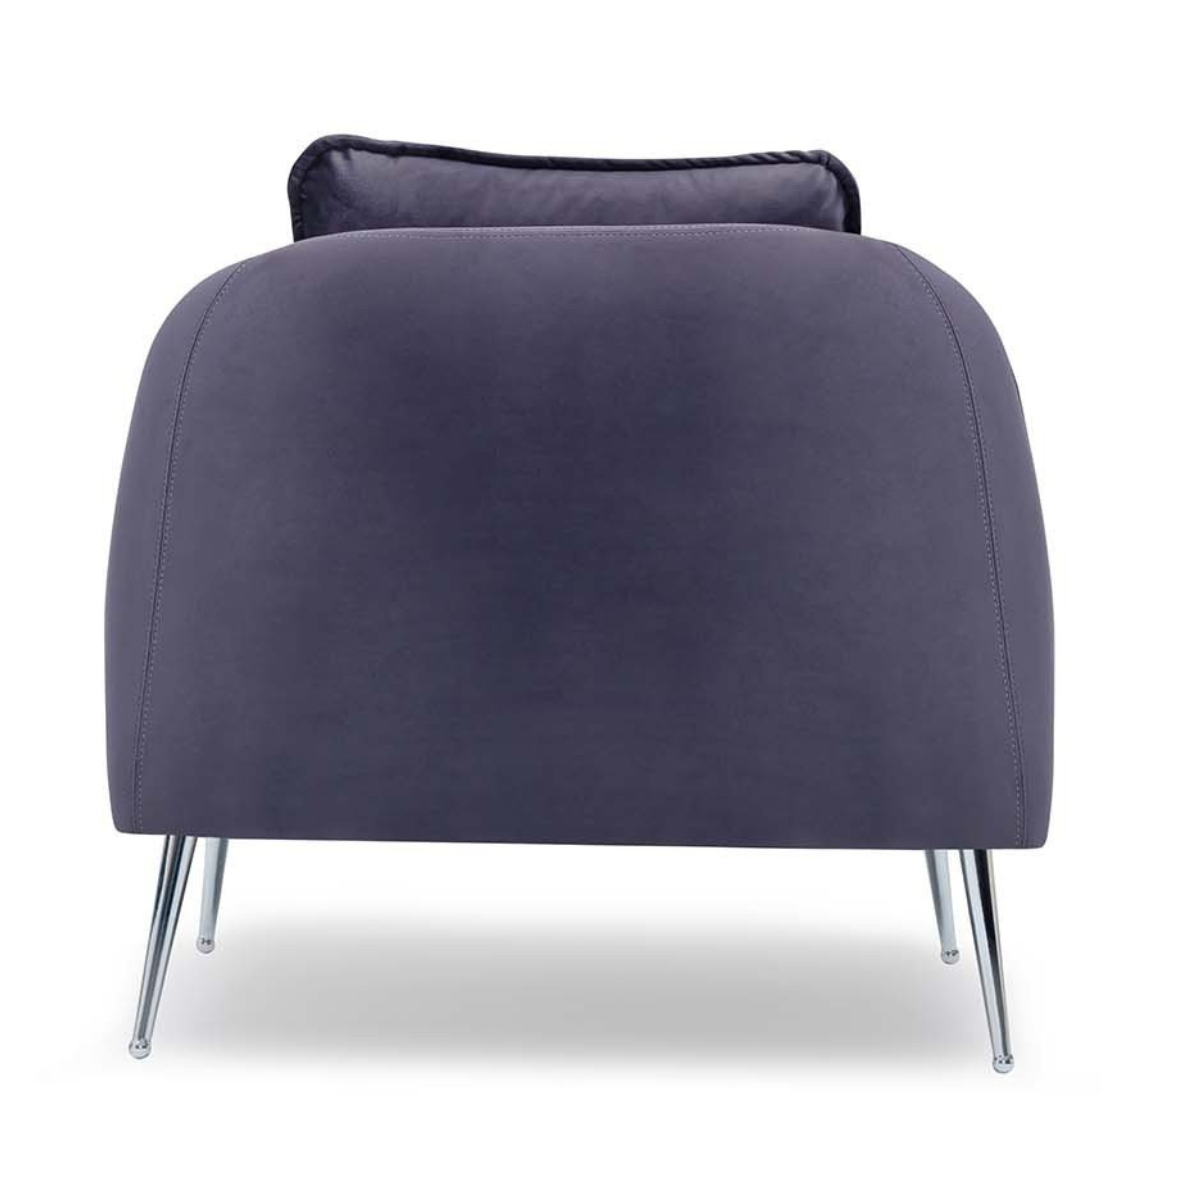 Janet Lounge Chair